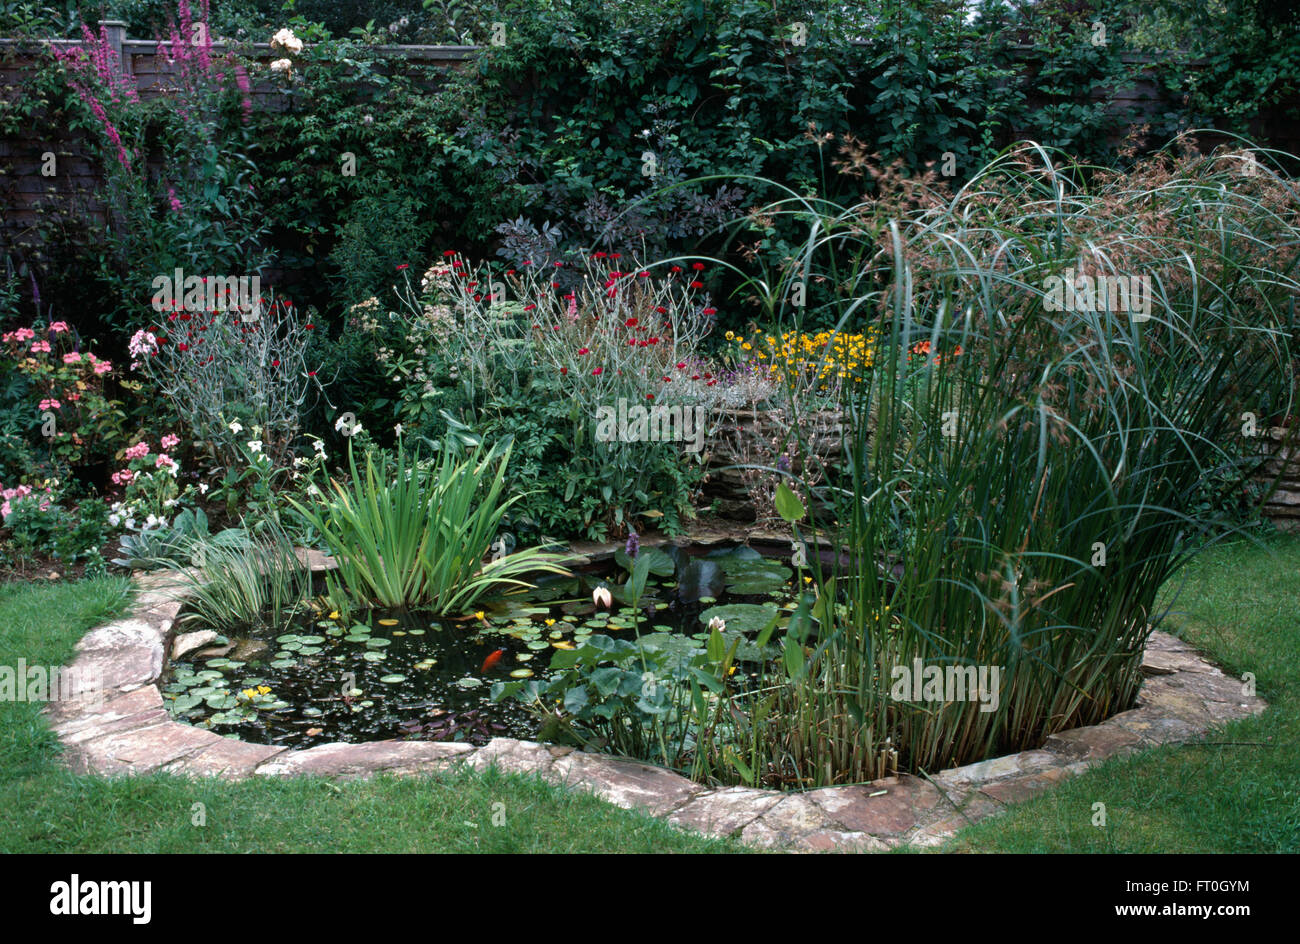 Stone paved edging around a curved pond in a town garden with a colorful perennial border Stock Photo